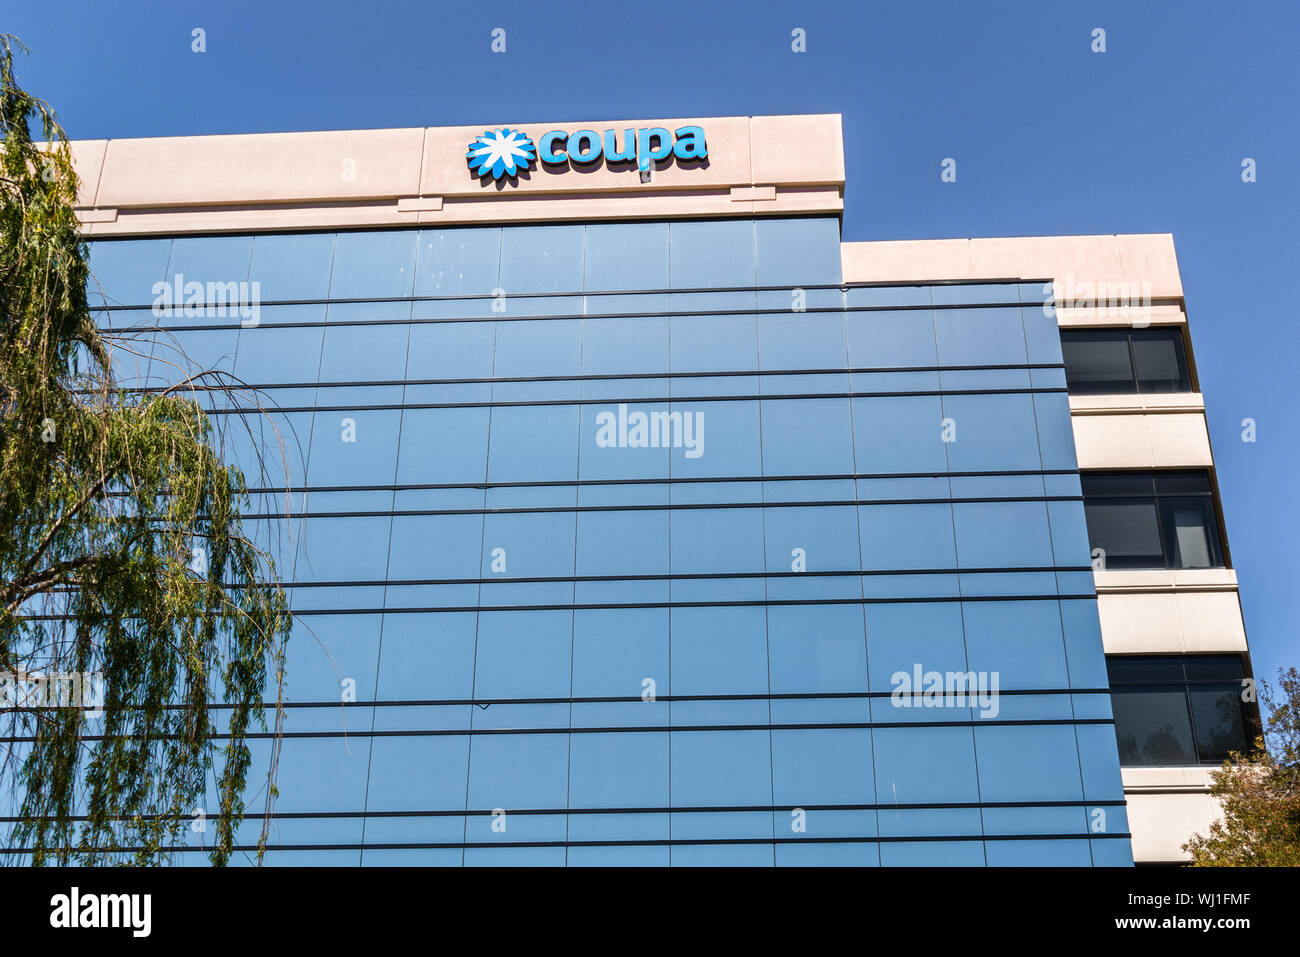 August 24, 2019 San Mateo / CA / USA - Coupa headquarters in Silicon Valley; Coupa Software is a global technology platform for Business Spend Managem Stock Photo